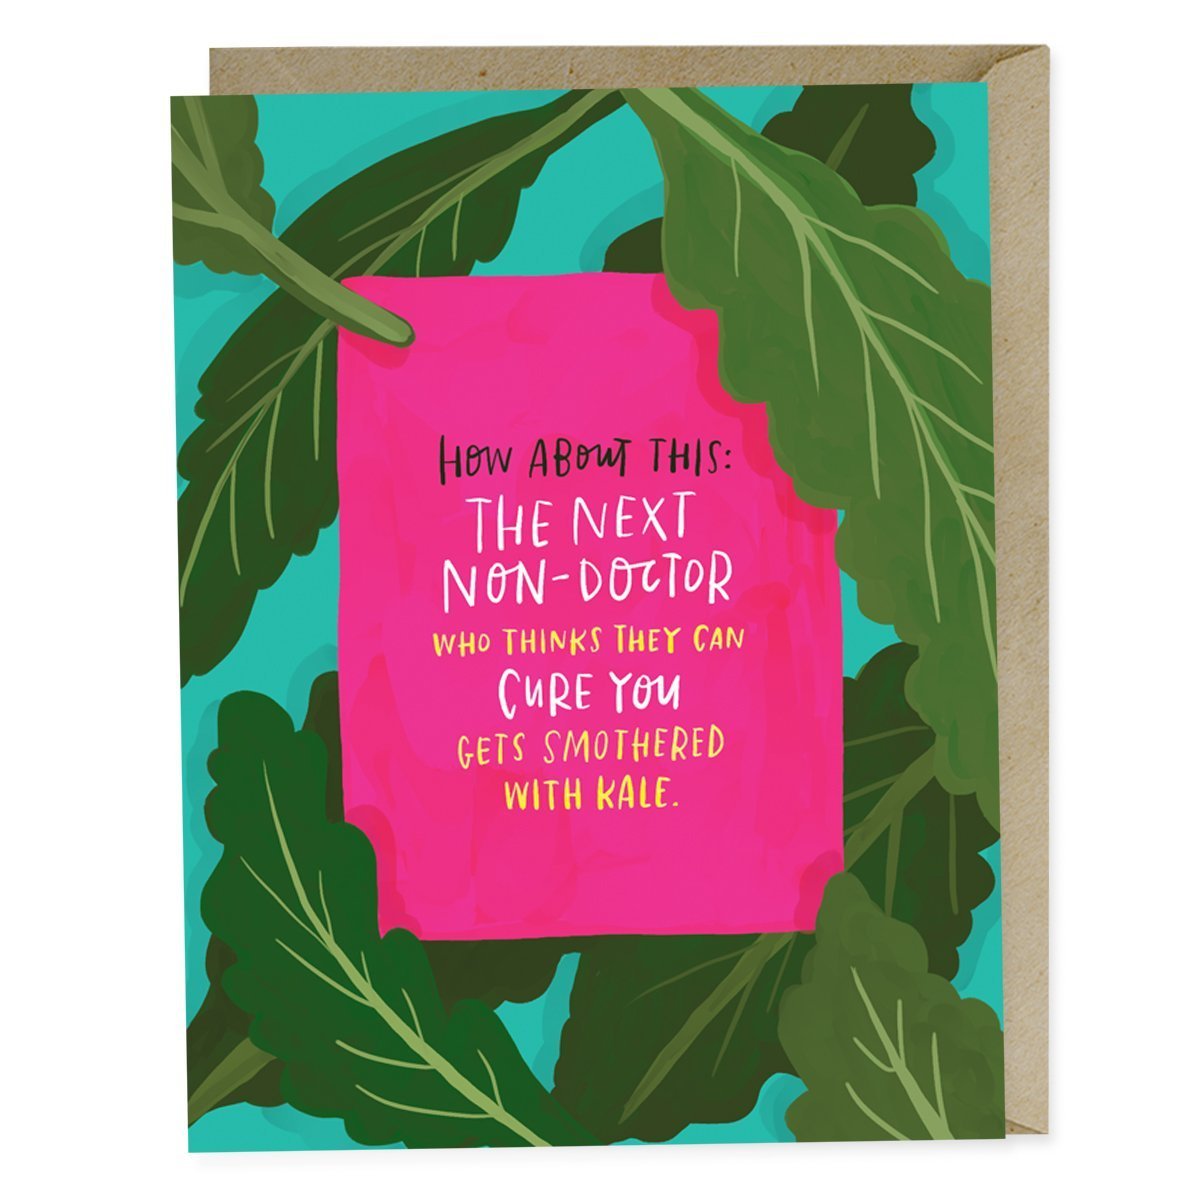 Smothered with Kale Empathy Card